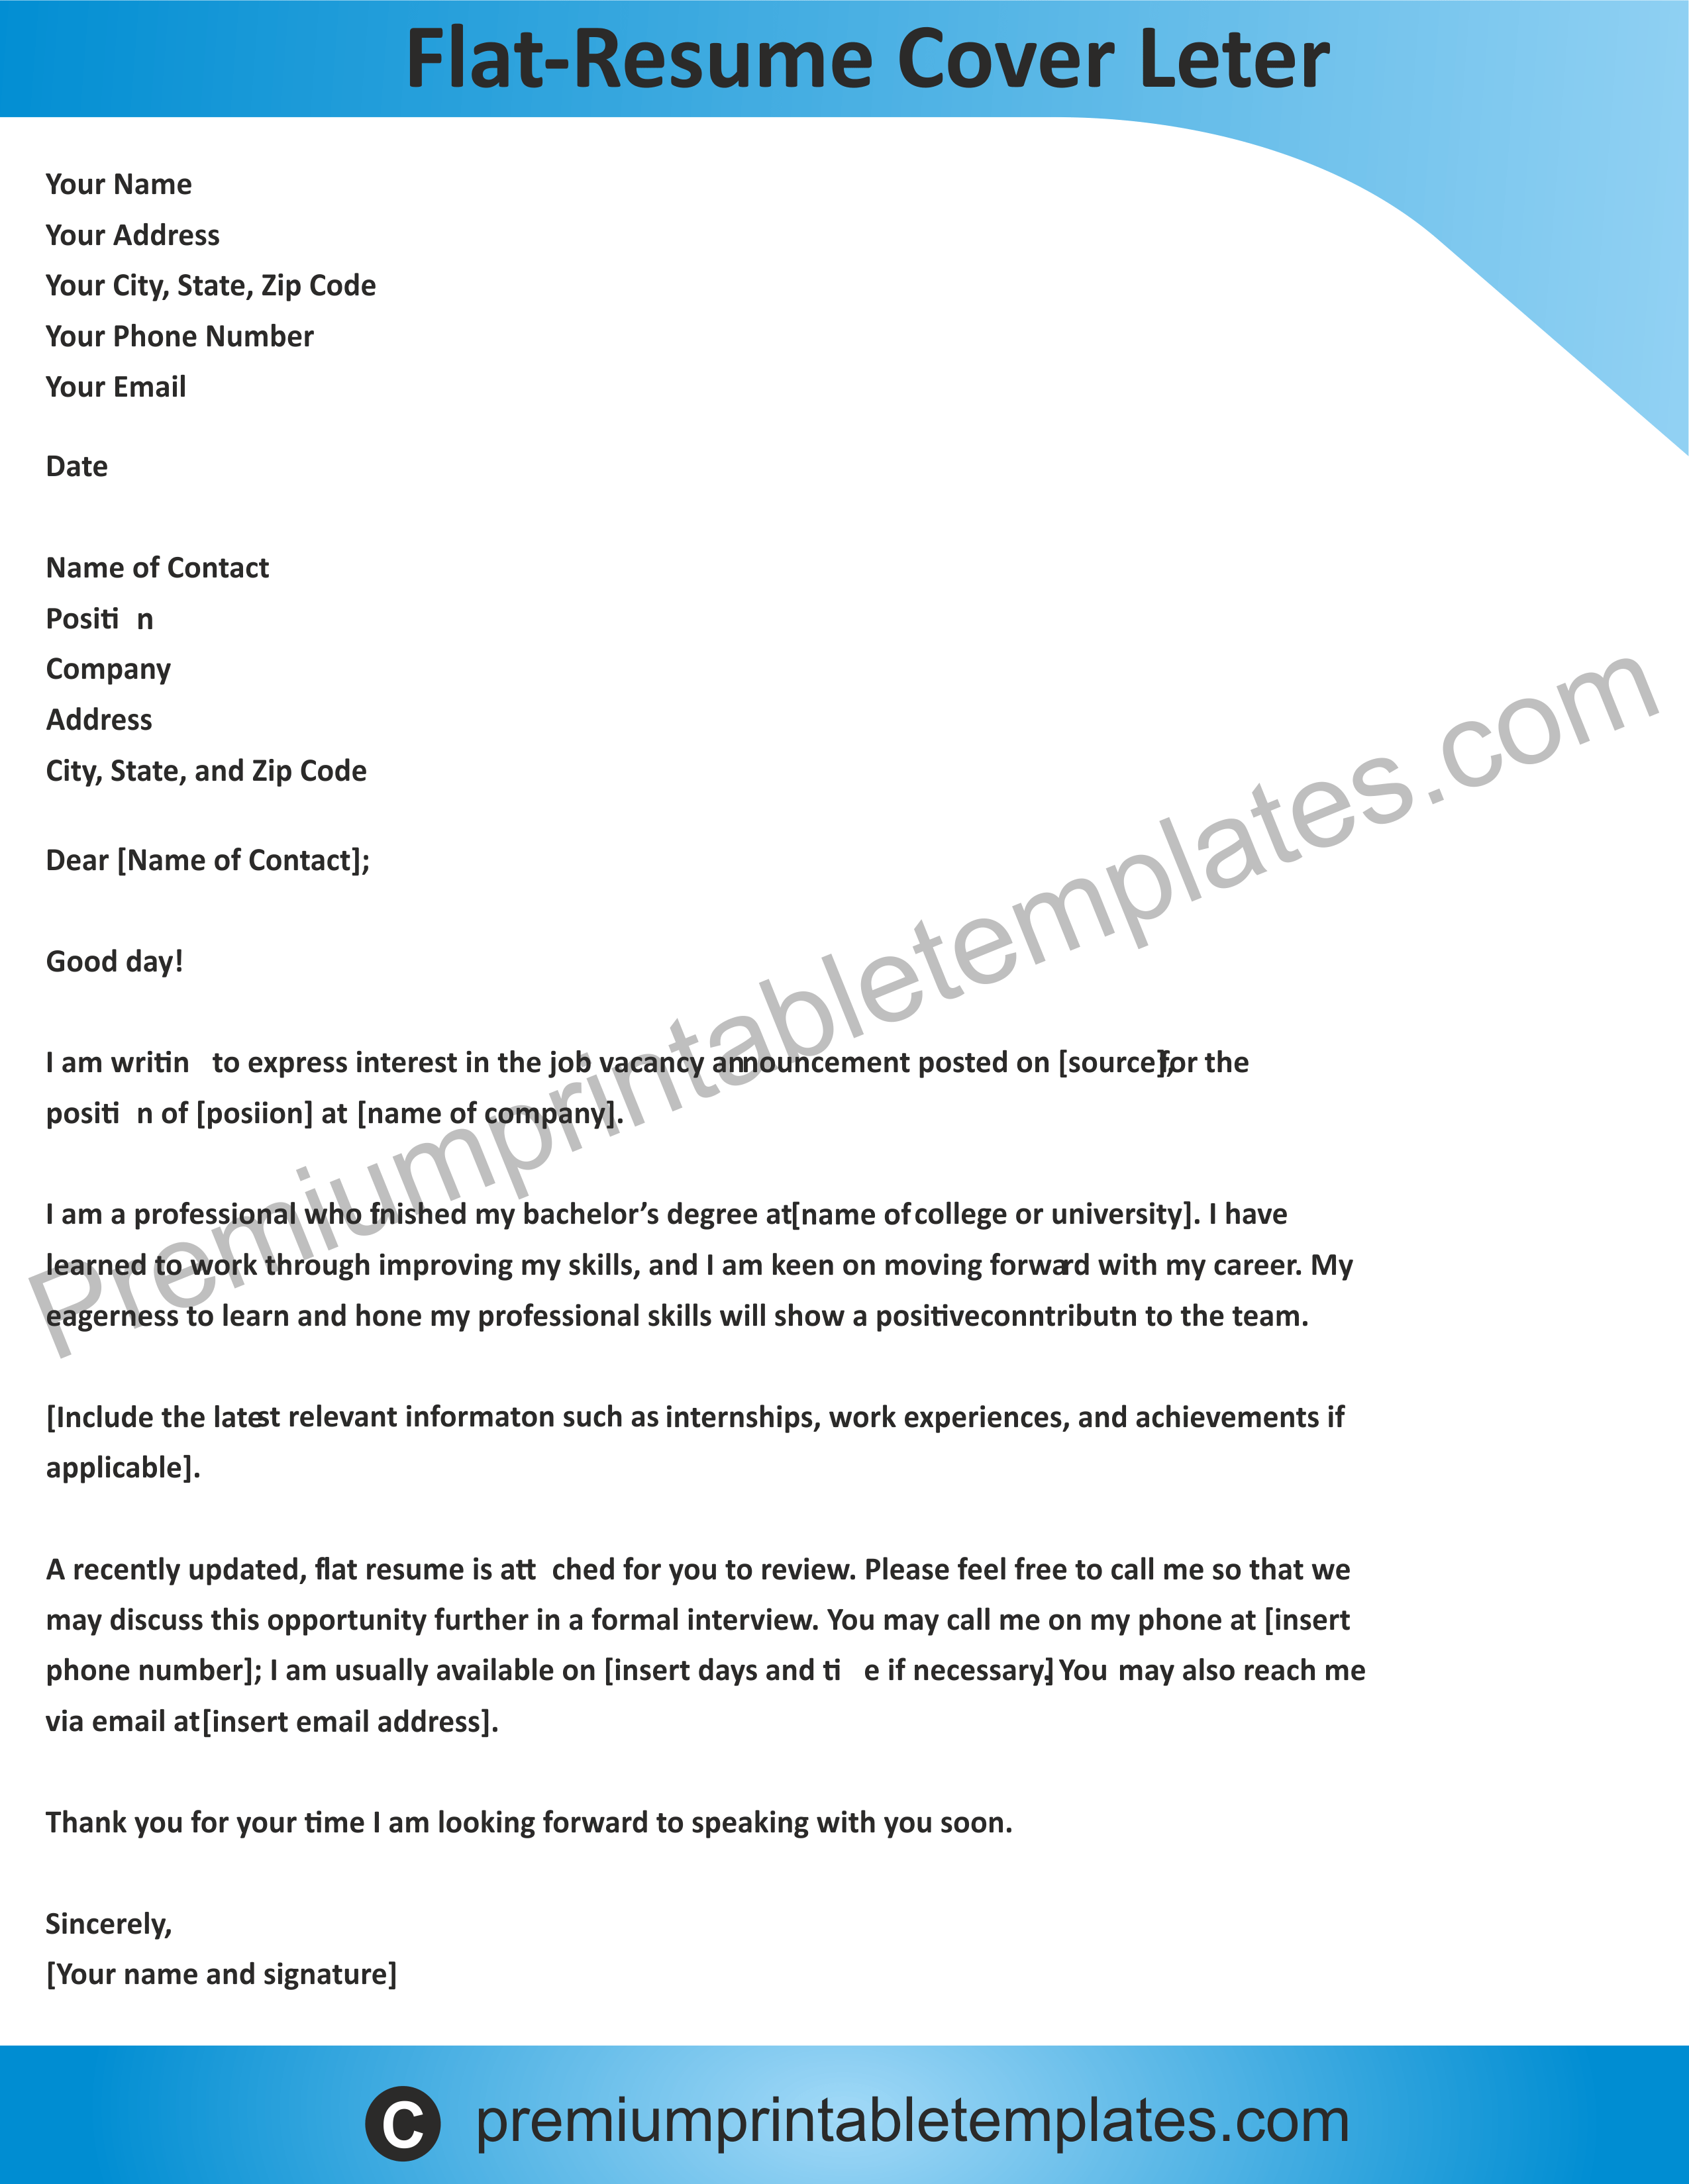 Resume Cover Letter Template from premiumprintabletemplates.com